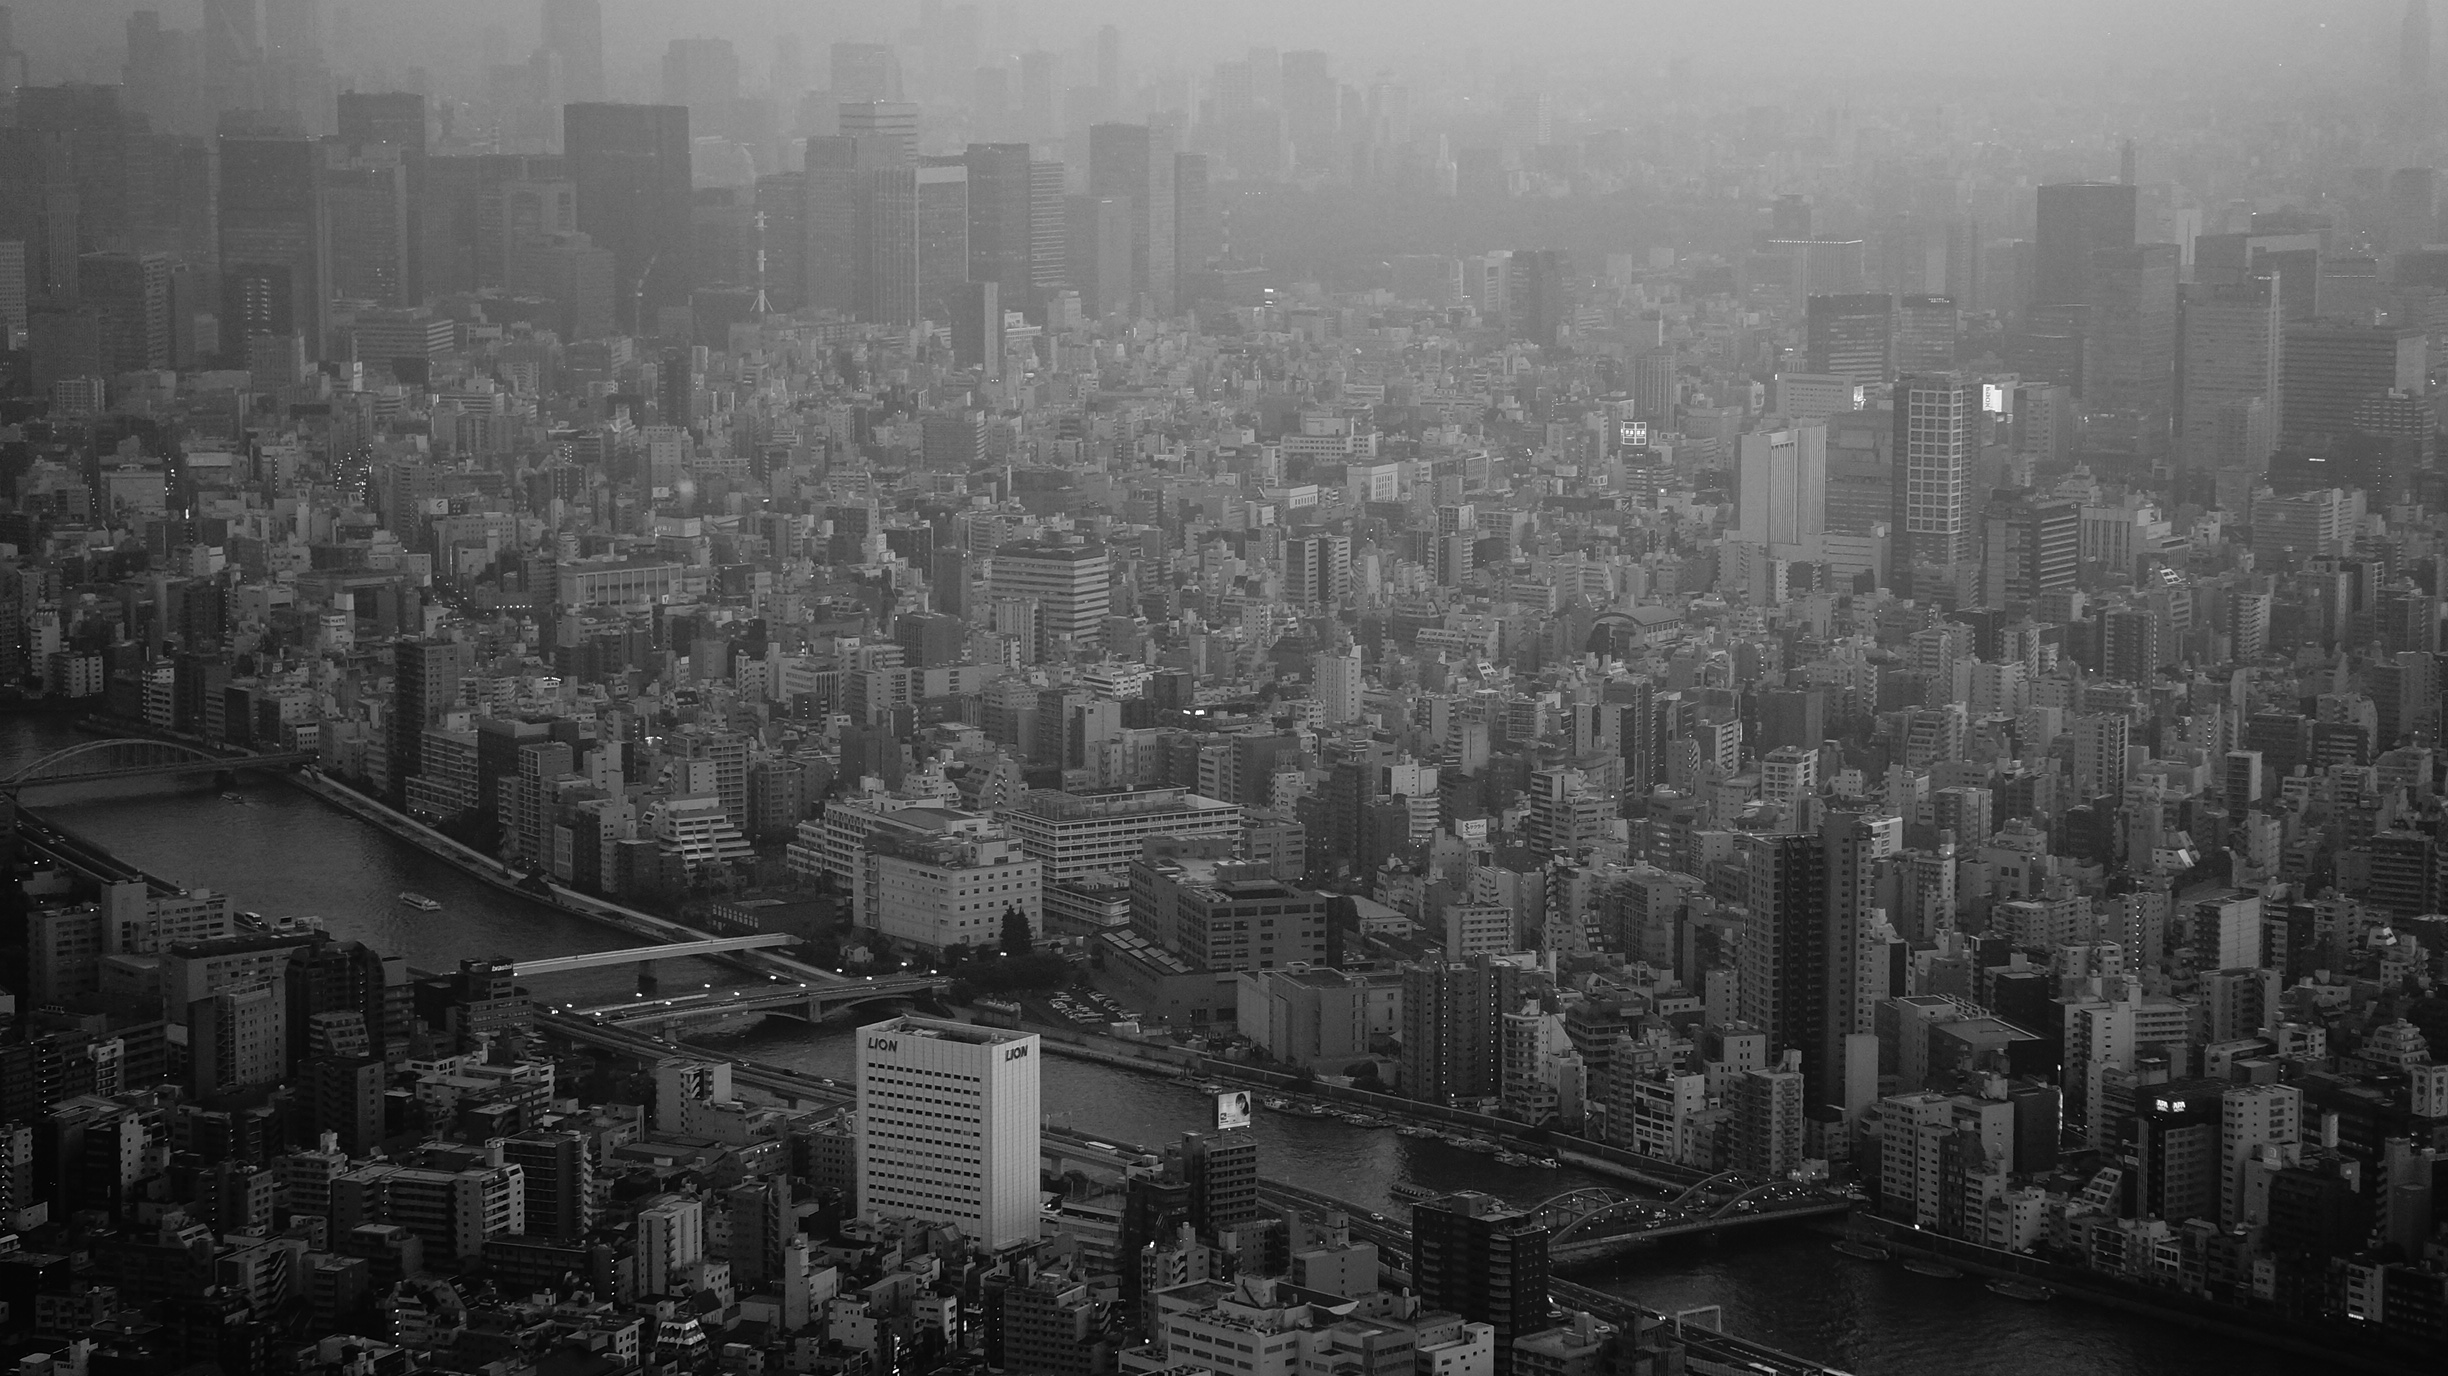 The view from the Tokyo SkyTree, a new broadcasting tower that opened in 2012. 